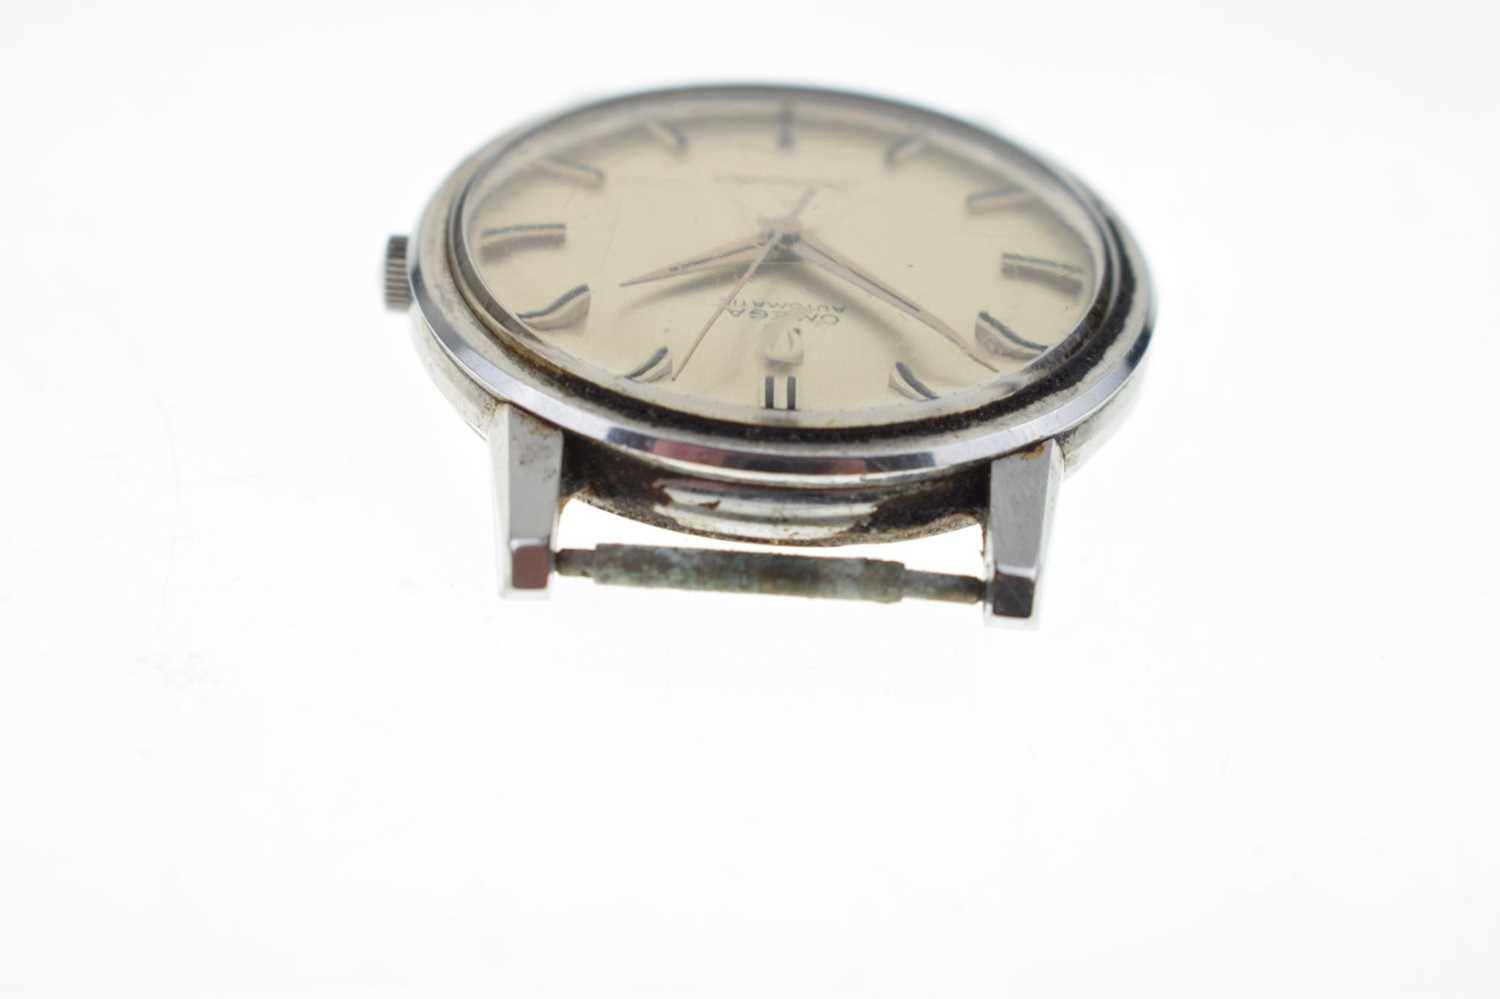 Omega - Gentleman's 1970s Seamaster Automatic watch head - Image 5 of 9